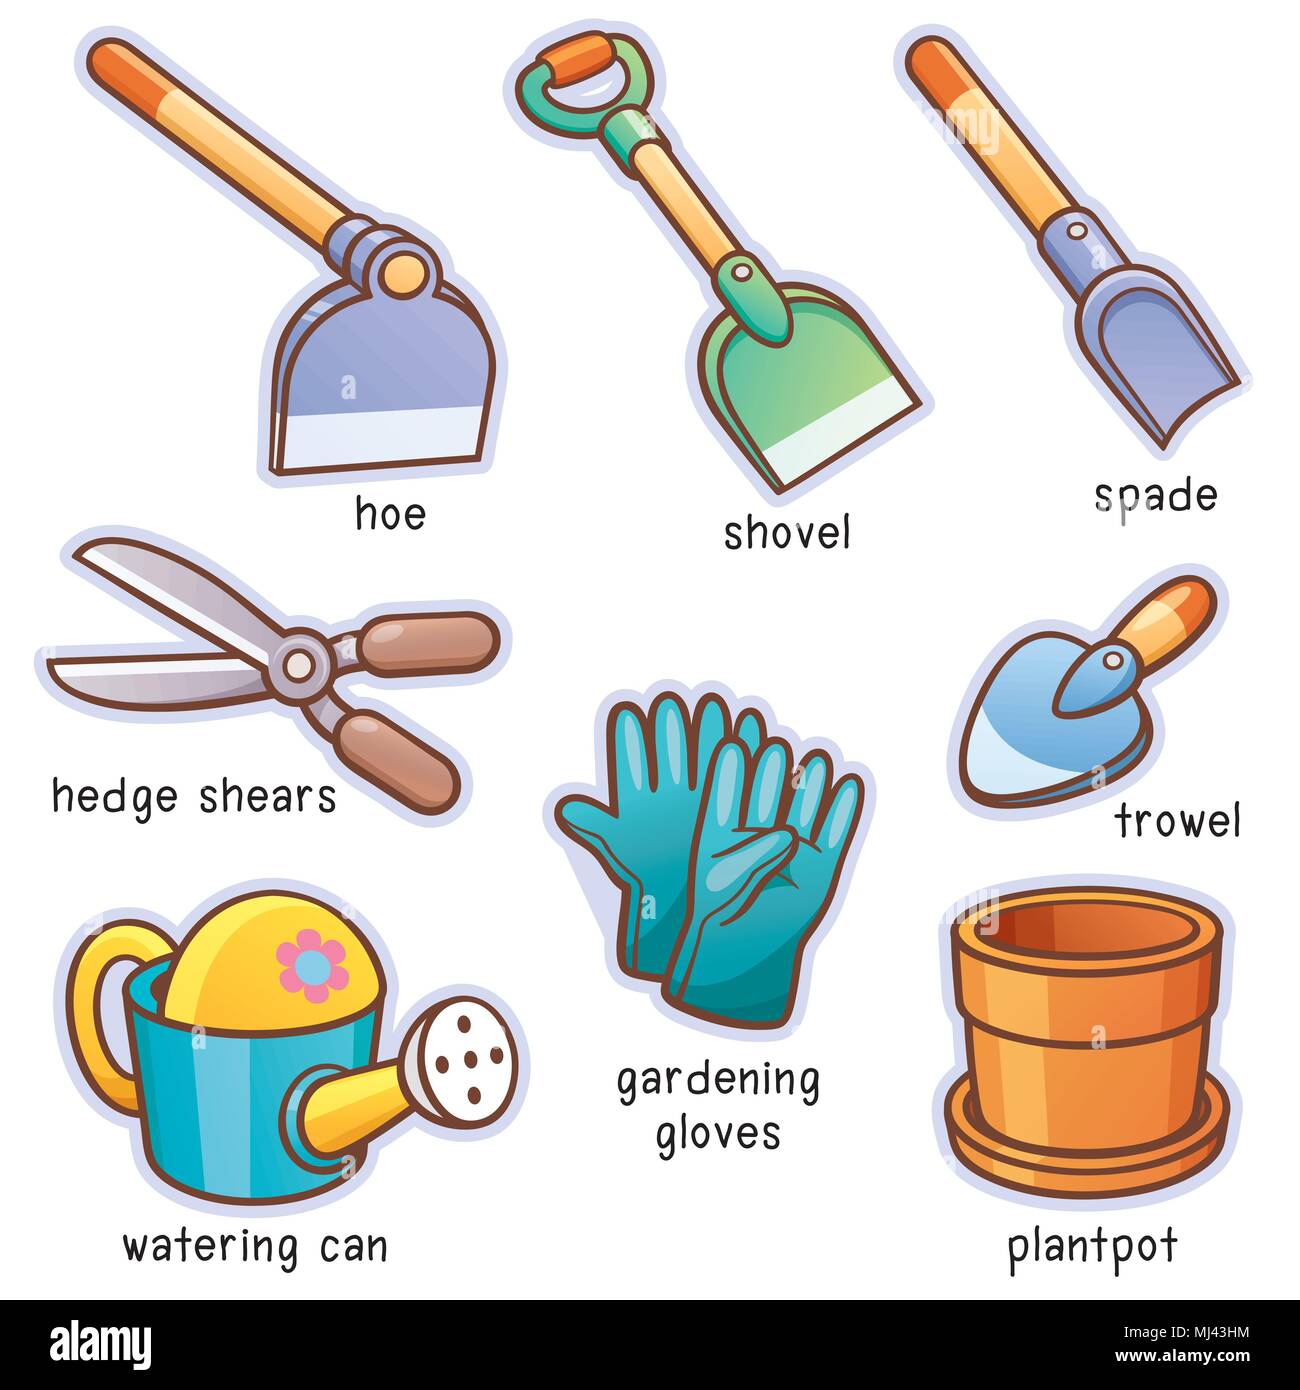 House Cleaning Items Vocabulary, Cleaning Supplies, Cleaning Tools